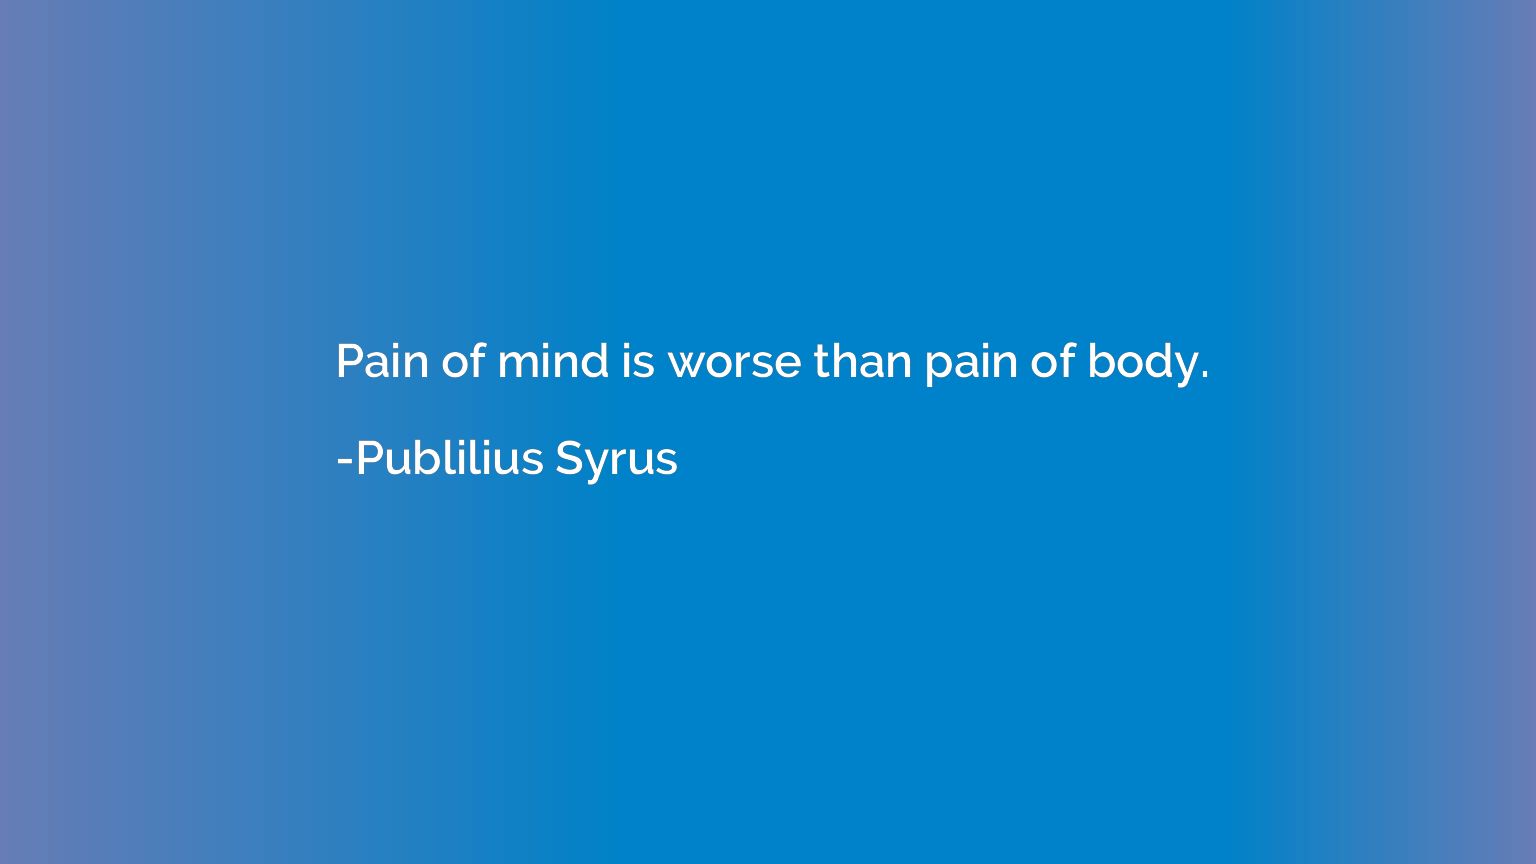 Pain of mind is worse than pain of body.